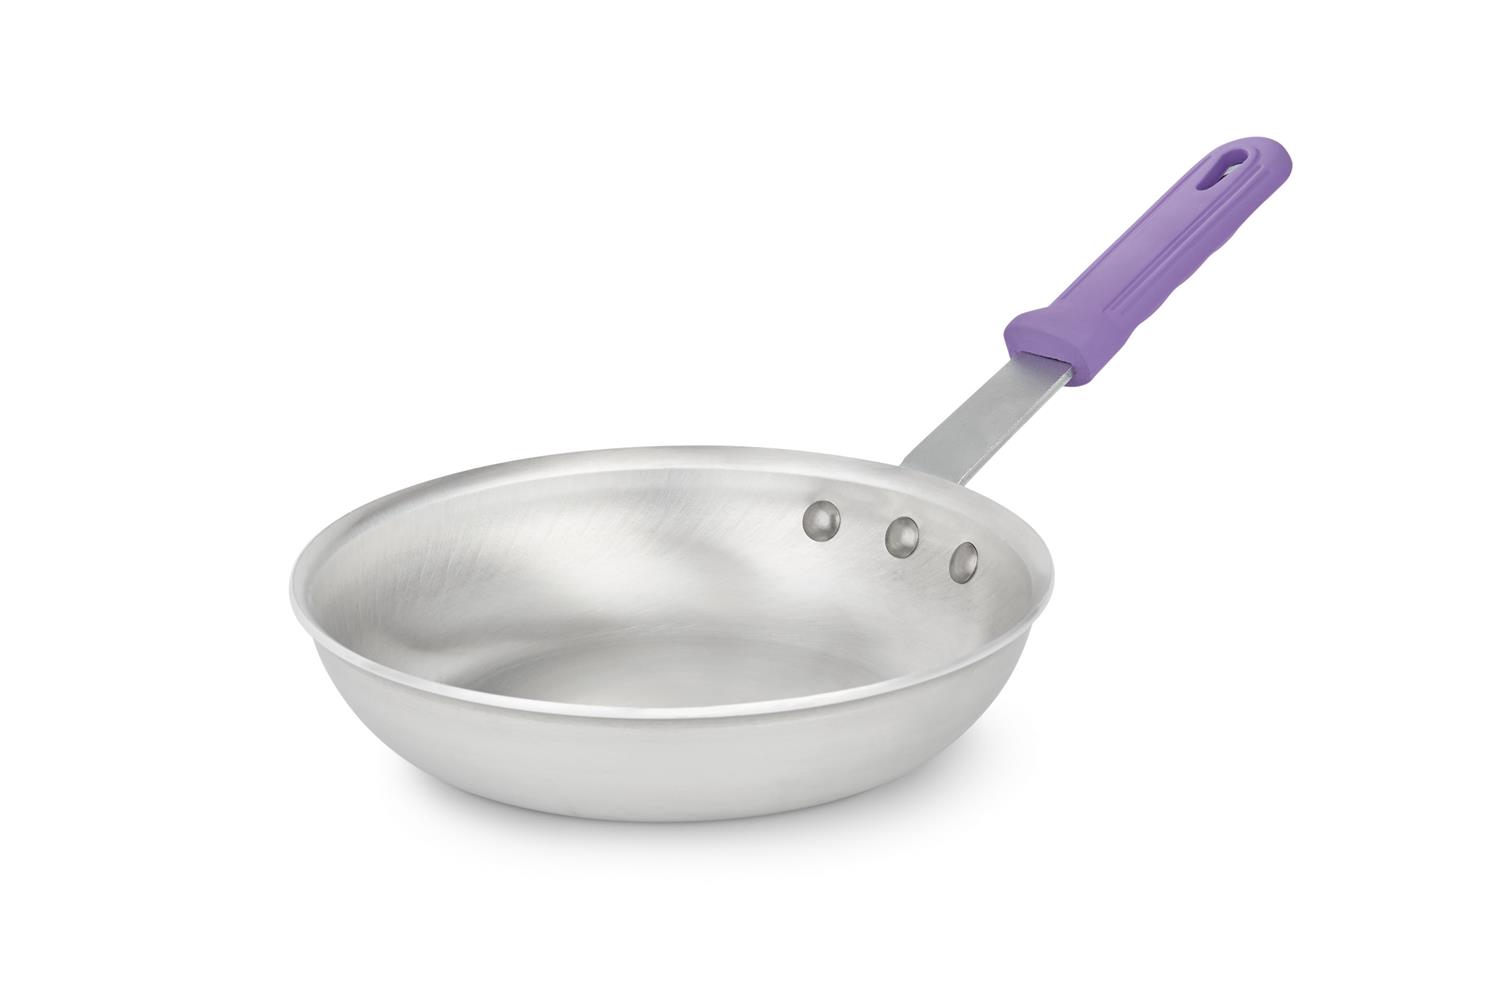 Vollrath 400880 Wear-Ever Fry Pan with Natural Finish and Purple Handle